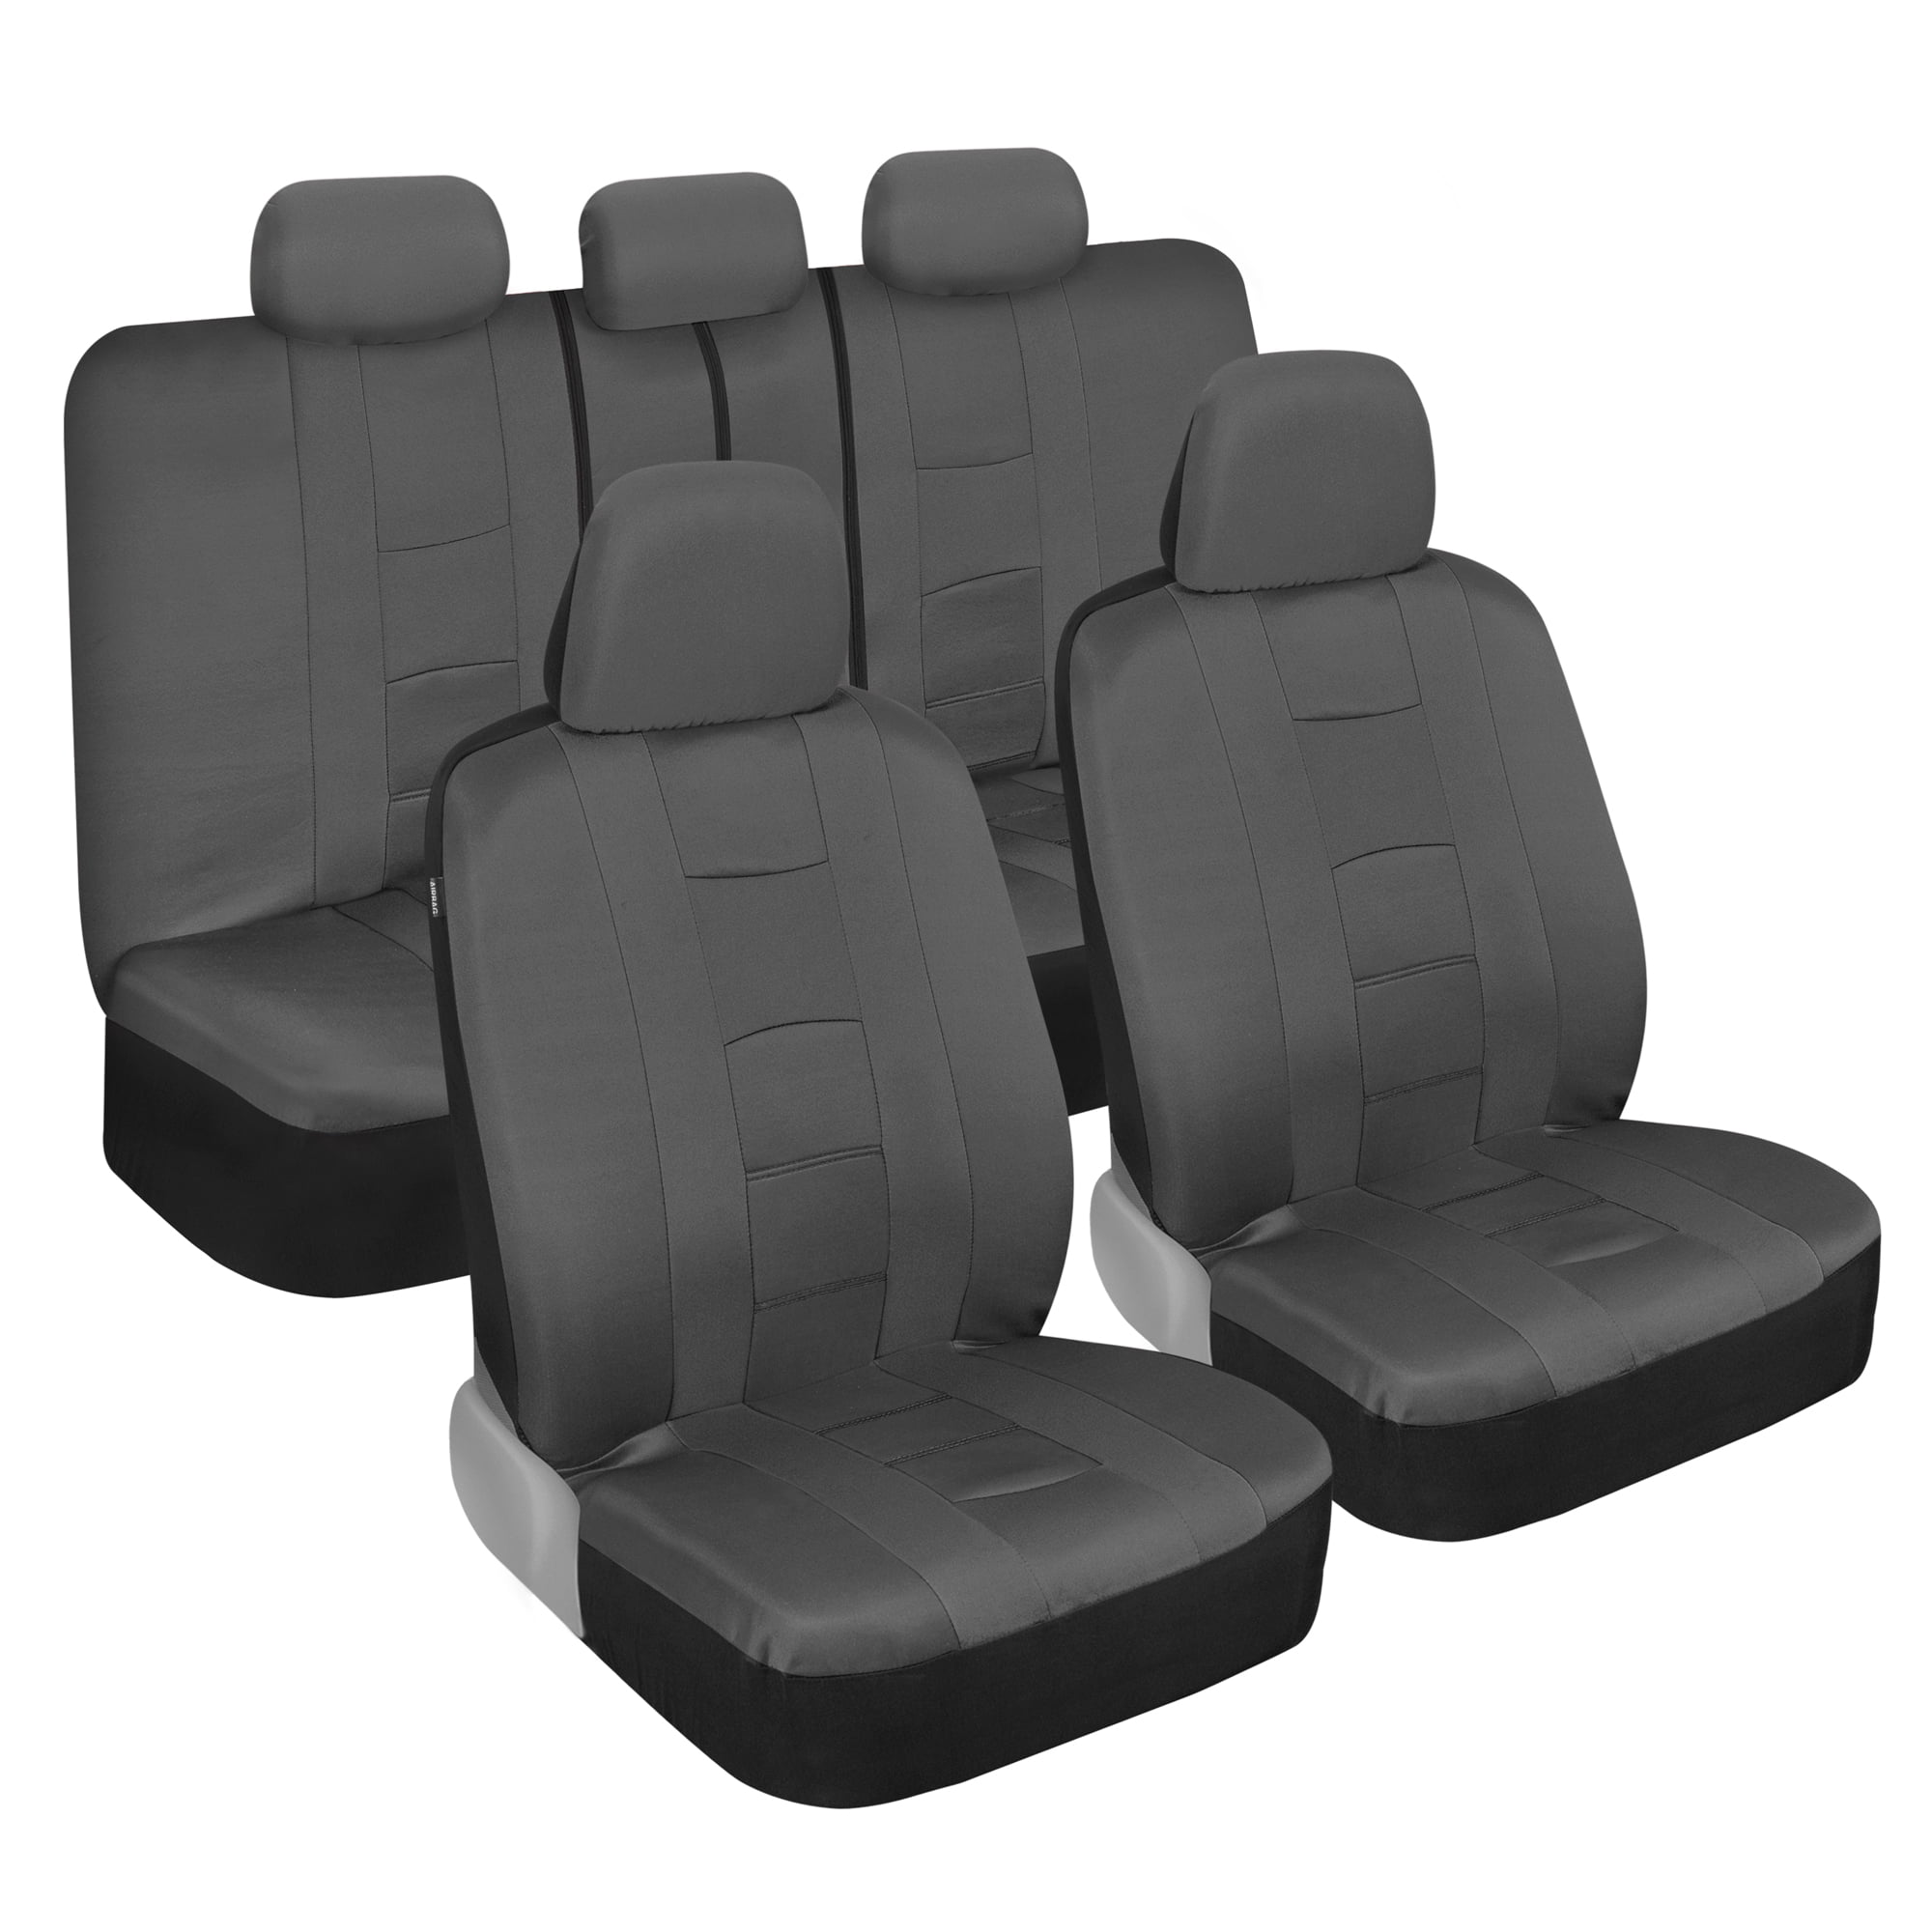 Turismo Full Set Car Seat Covers Front & Rear Bench for Auto Truck SUV  Black